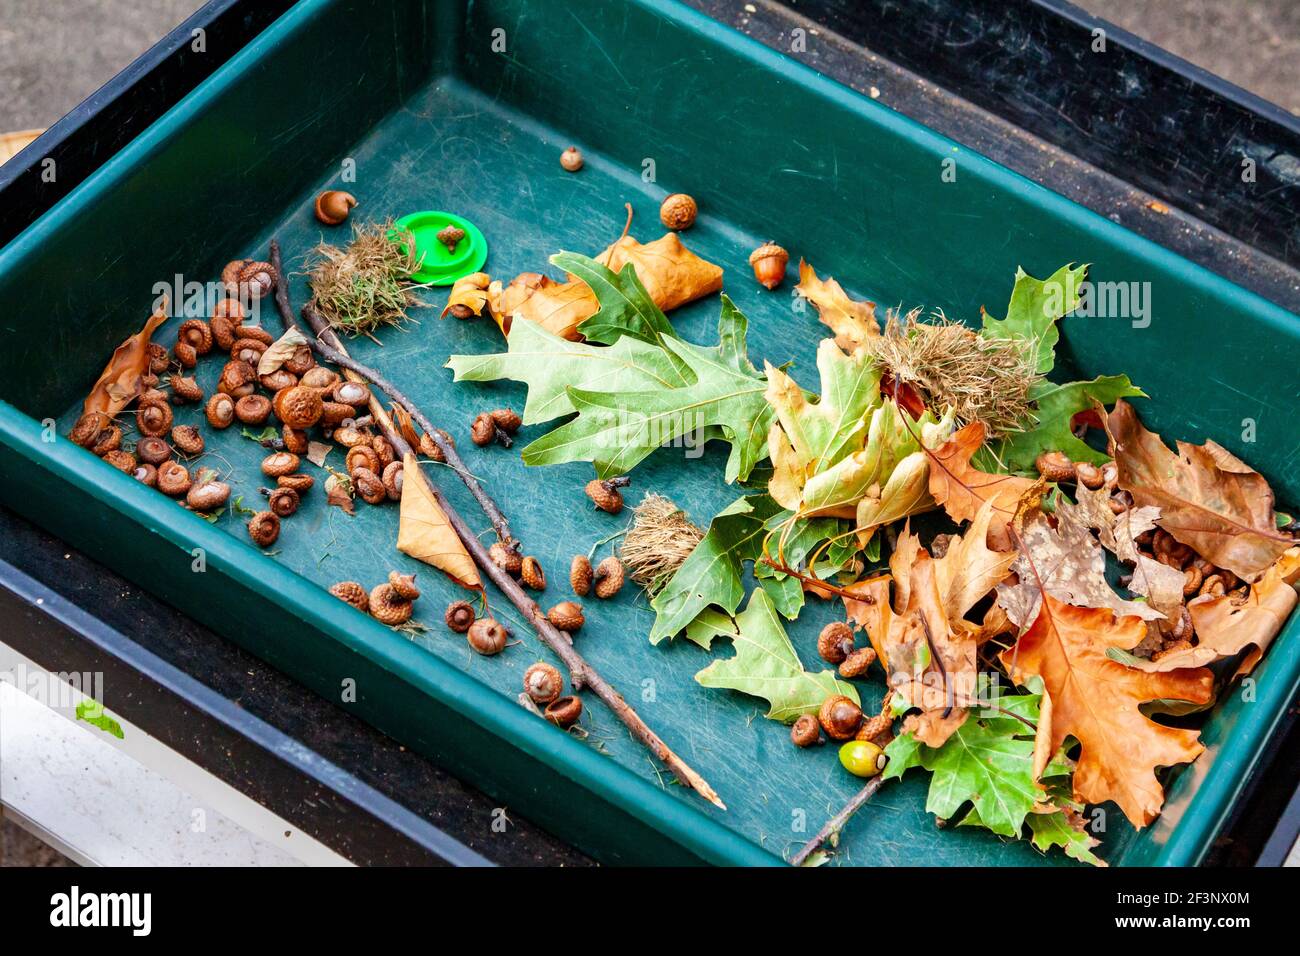 Plastic tray containing autumn leaves and acorns collected during an outdoor learning project about nature at a primary school. Stock Photo